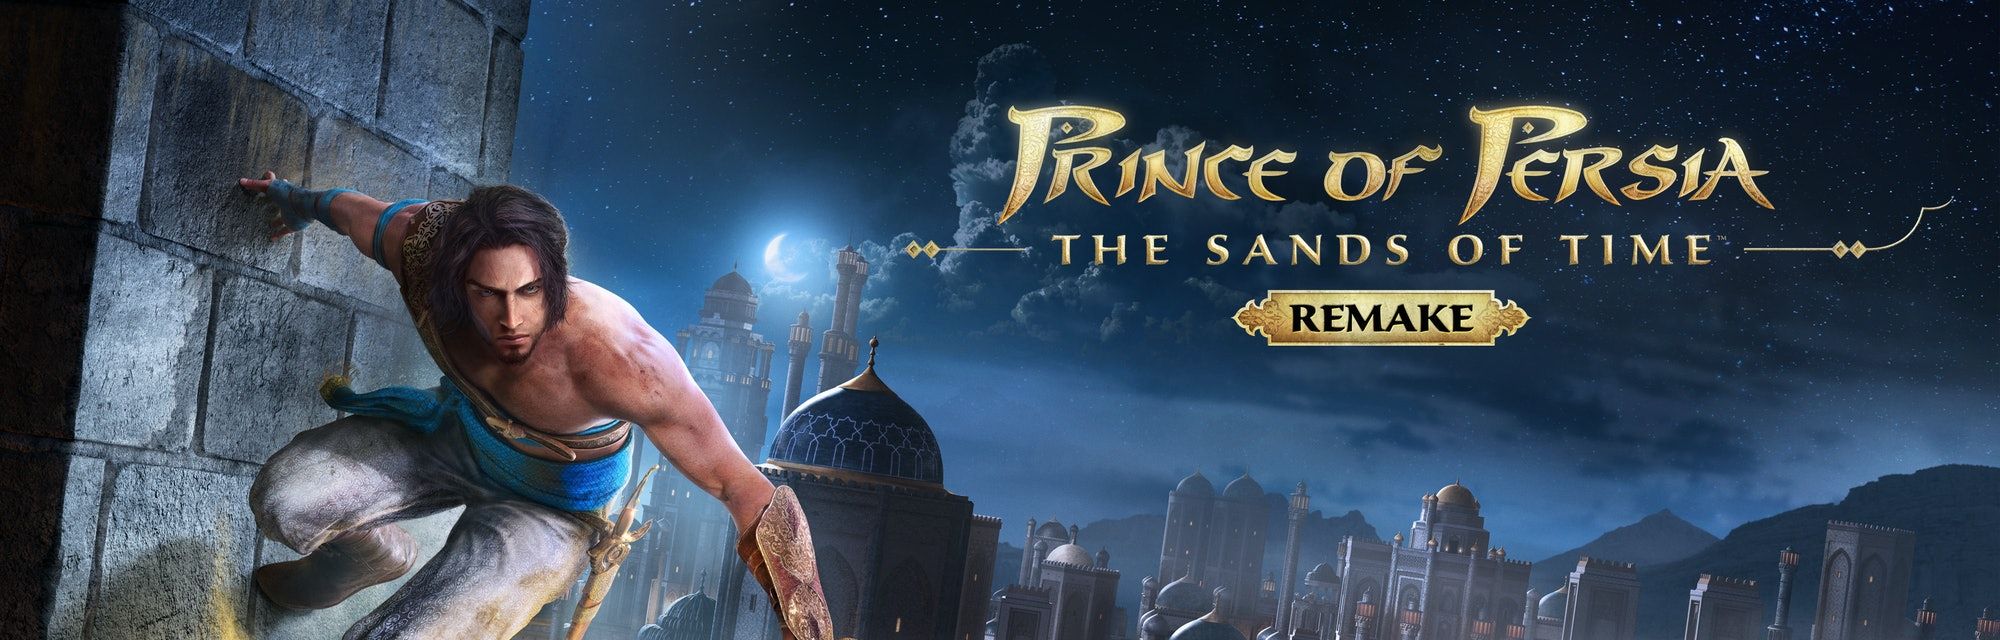 Prince of Persia: Sands of Time' remake release date, trailer, and changes